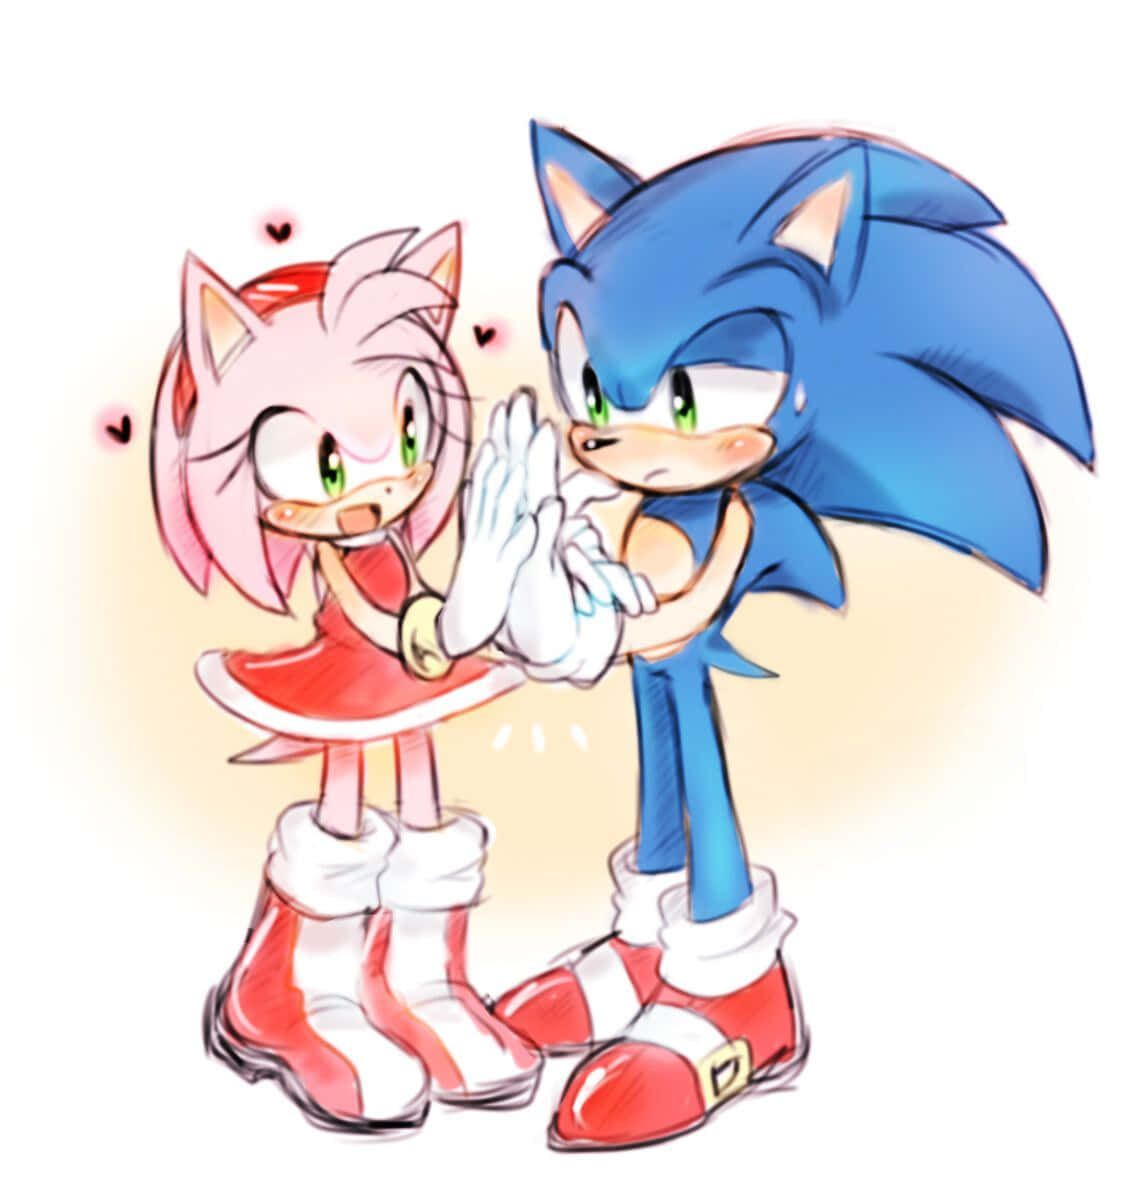 Sonic and Amy's Adventure Wallpaper